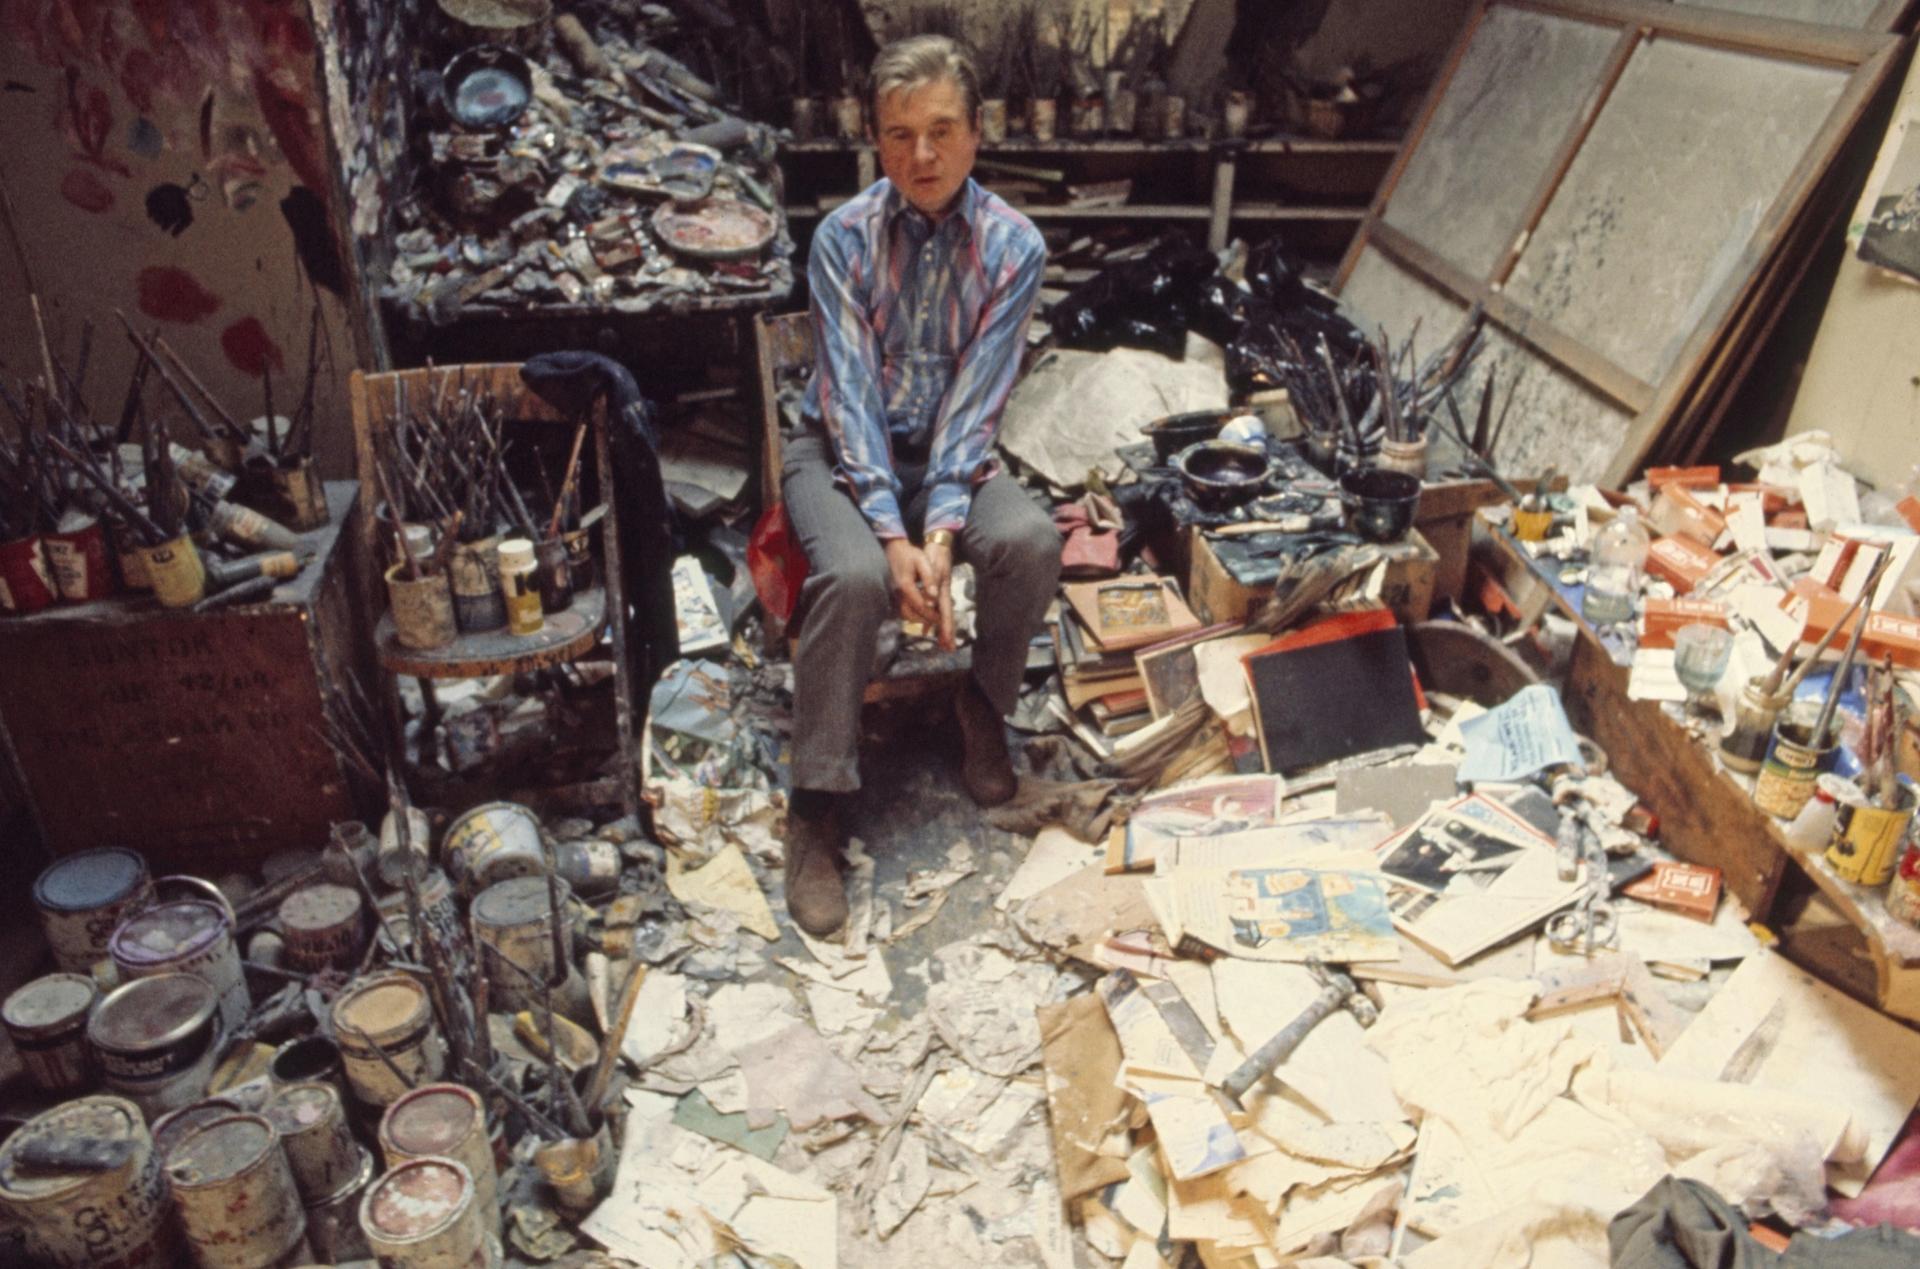 Francis Bacon in his studio in London in 1974 Photo: Michael Holtz; Photo 12 / Alamy Stock Photo